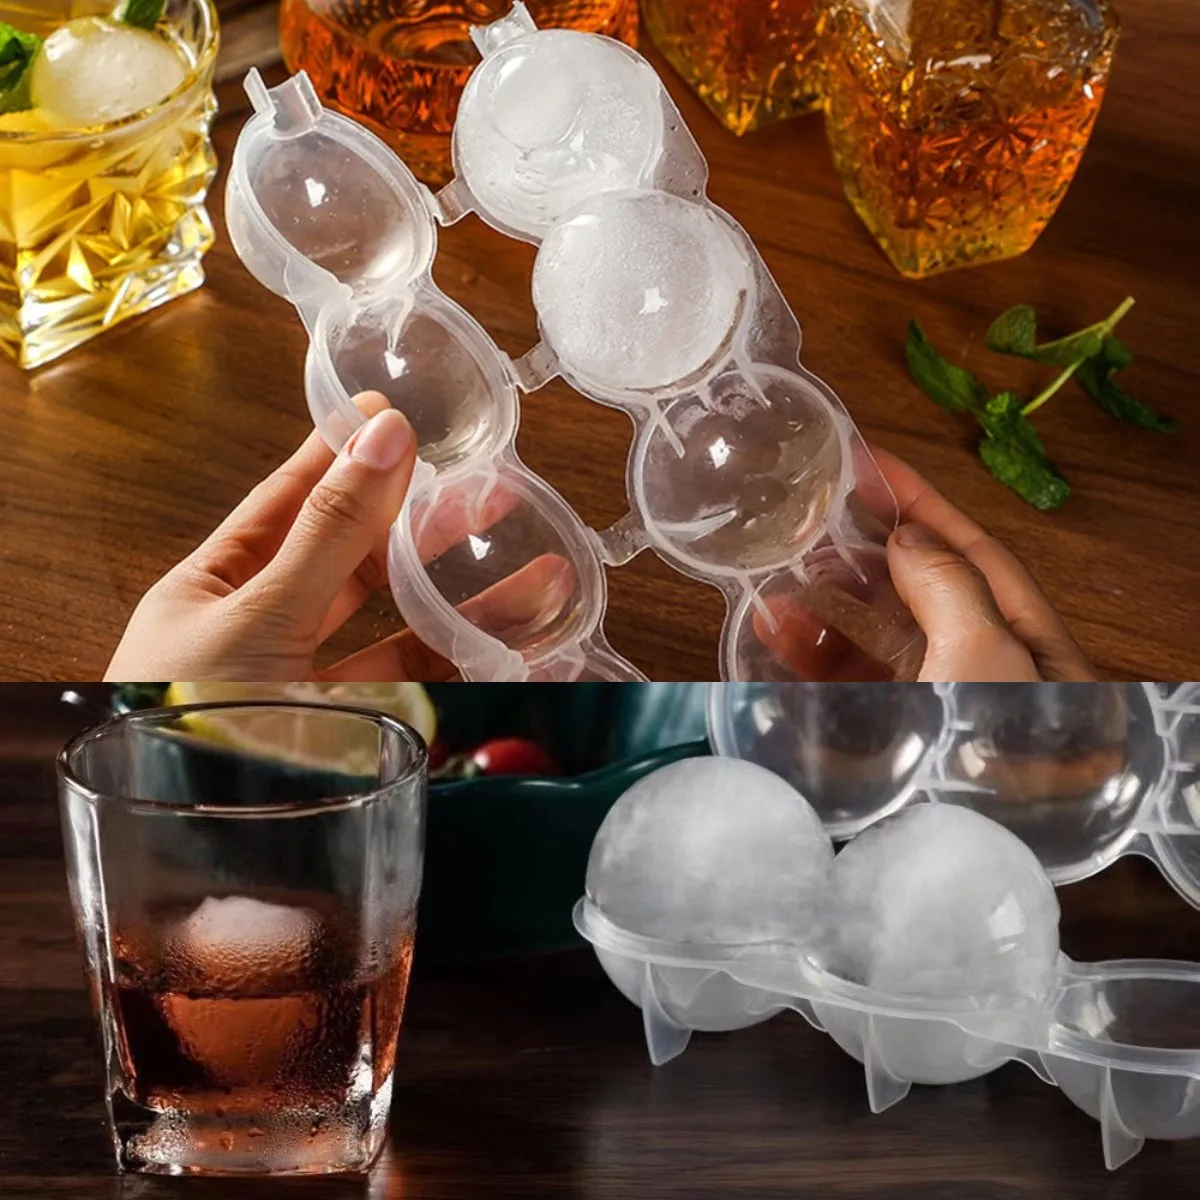 https://ae01.alicdn.com/kf/S73dc15ce191b4915880fe628cb8e7fd8C/New-Ice-Ball-Mold-Ice-Ball-Maker-DIY-Ice-Cream-Moulds-Whiskey-Cocktail-Sphere-Round-Ice.jpg